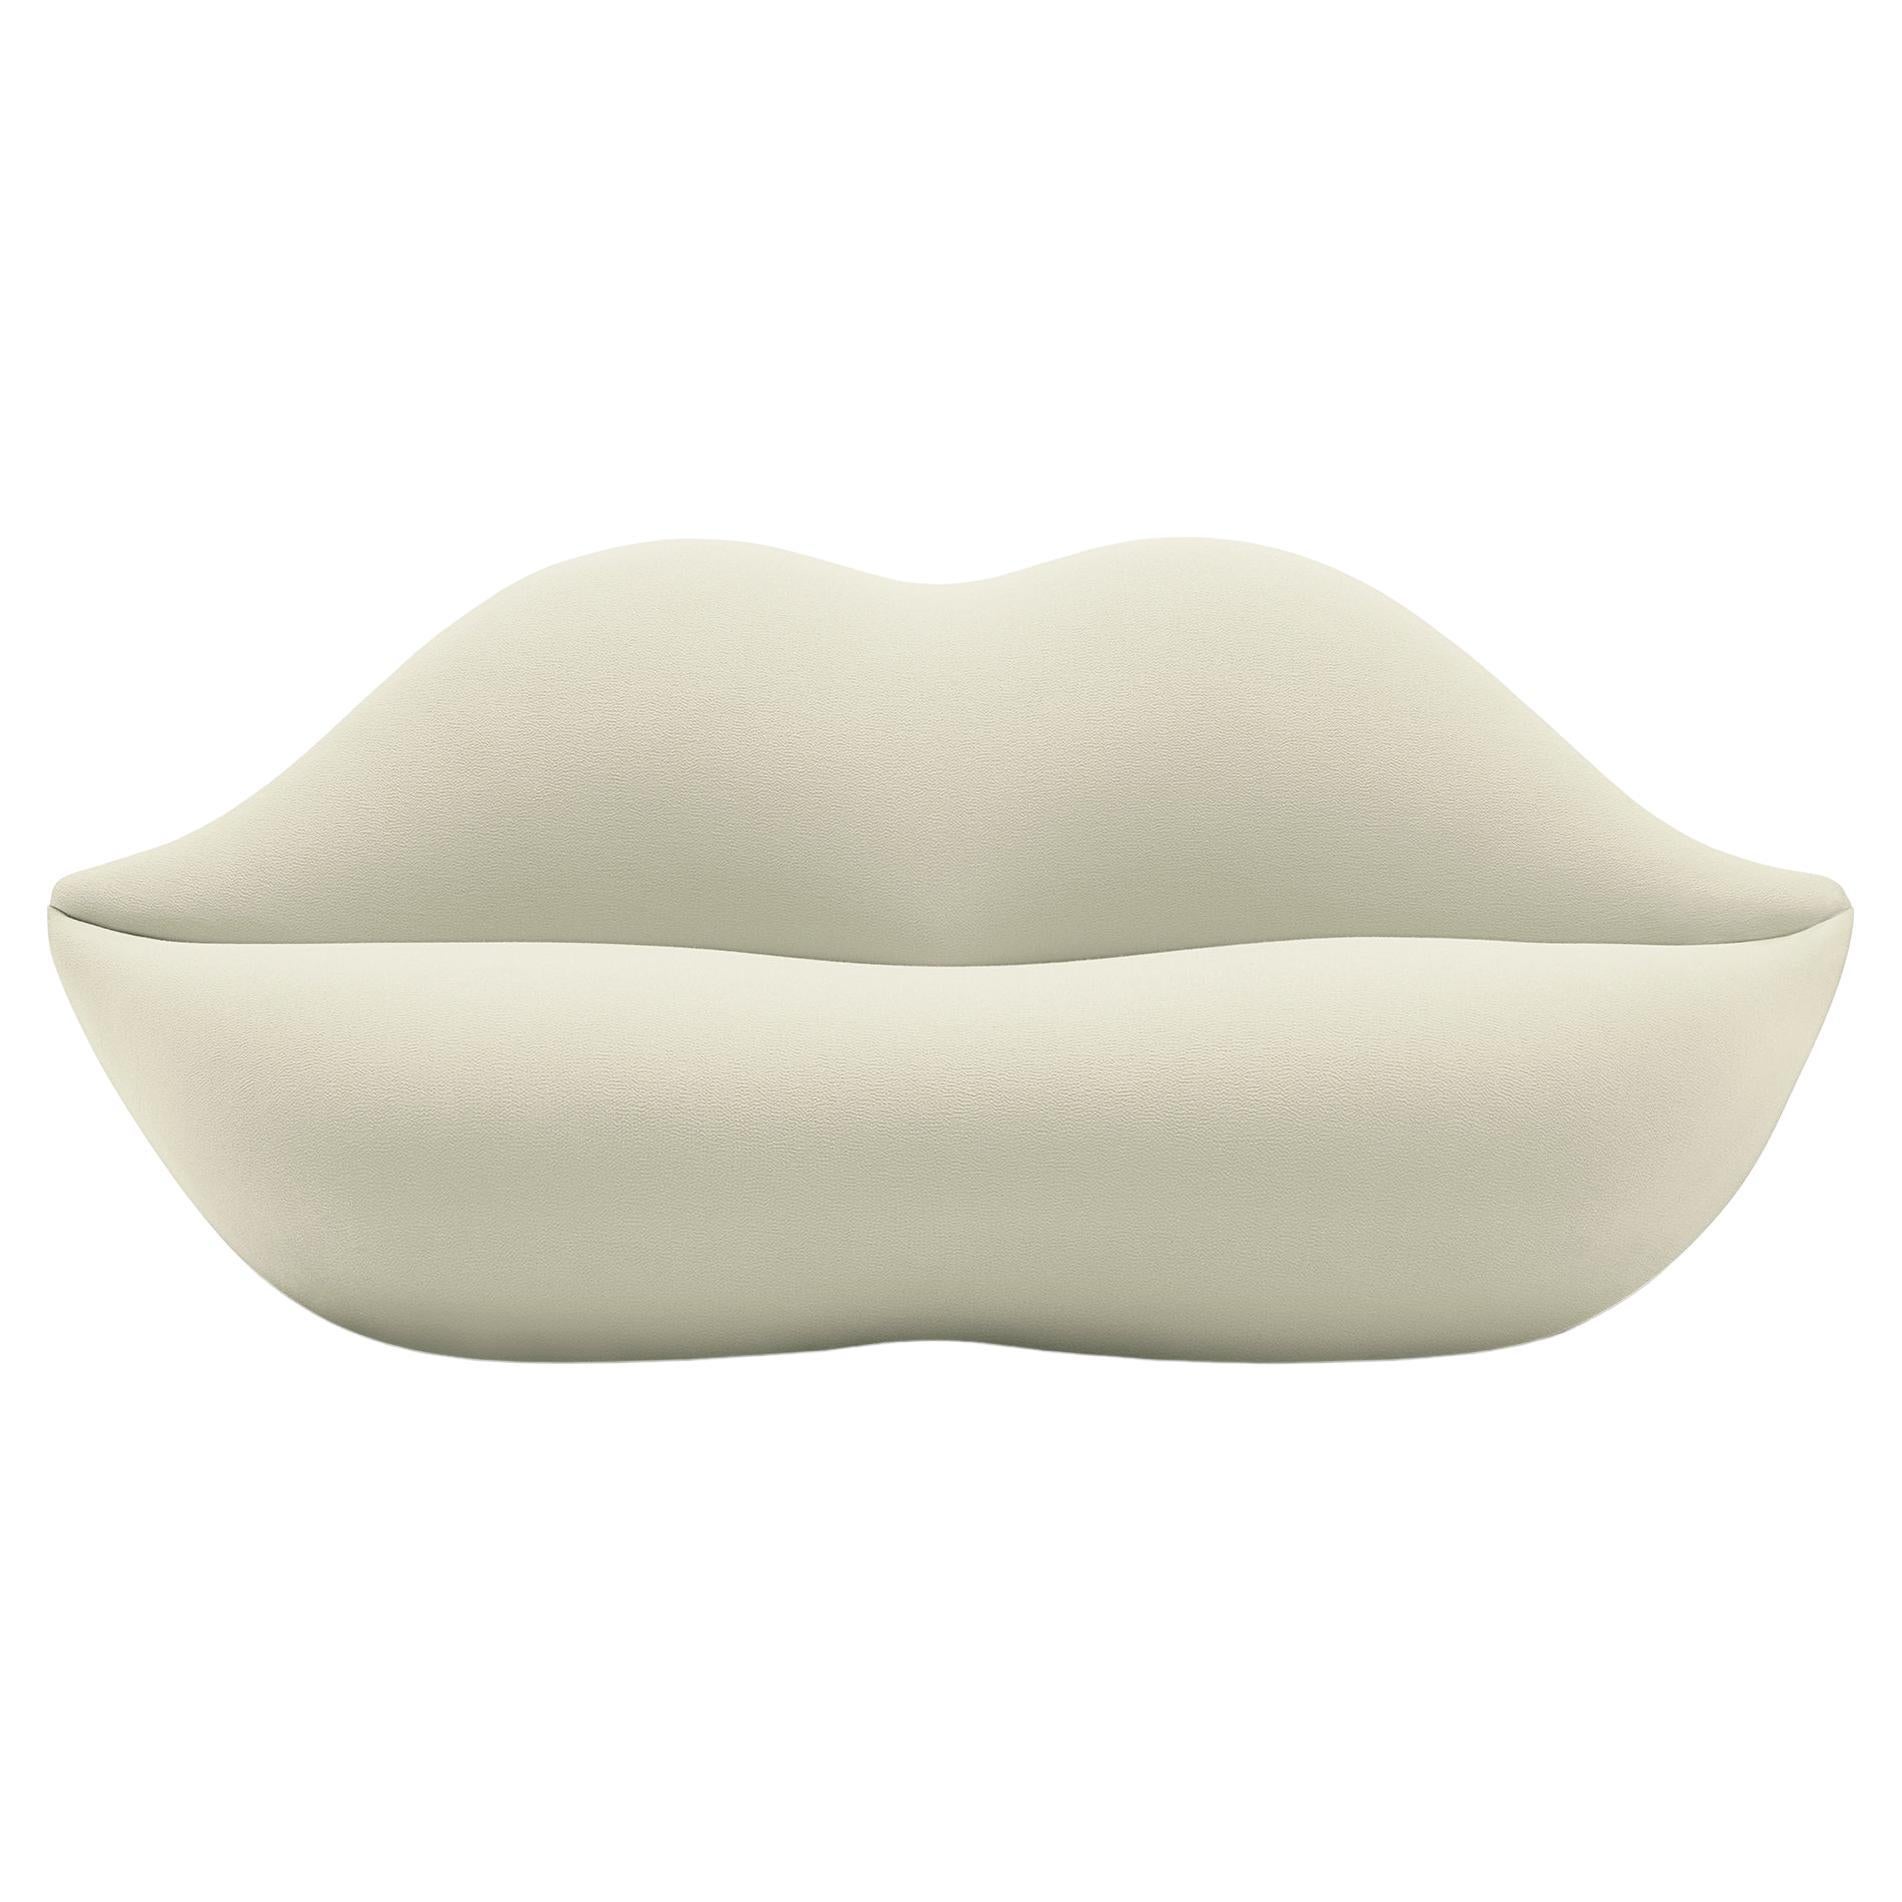 In Stock Gufram, 'Bocca Unlimited' Lip-Shaped Sofa, 335-Ivory, by Studio 65 For Sale